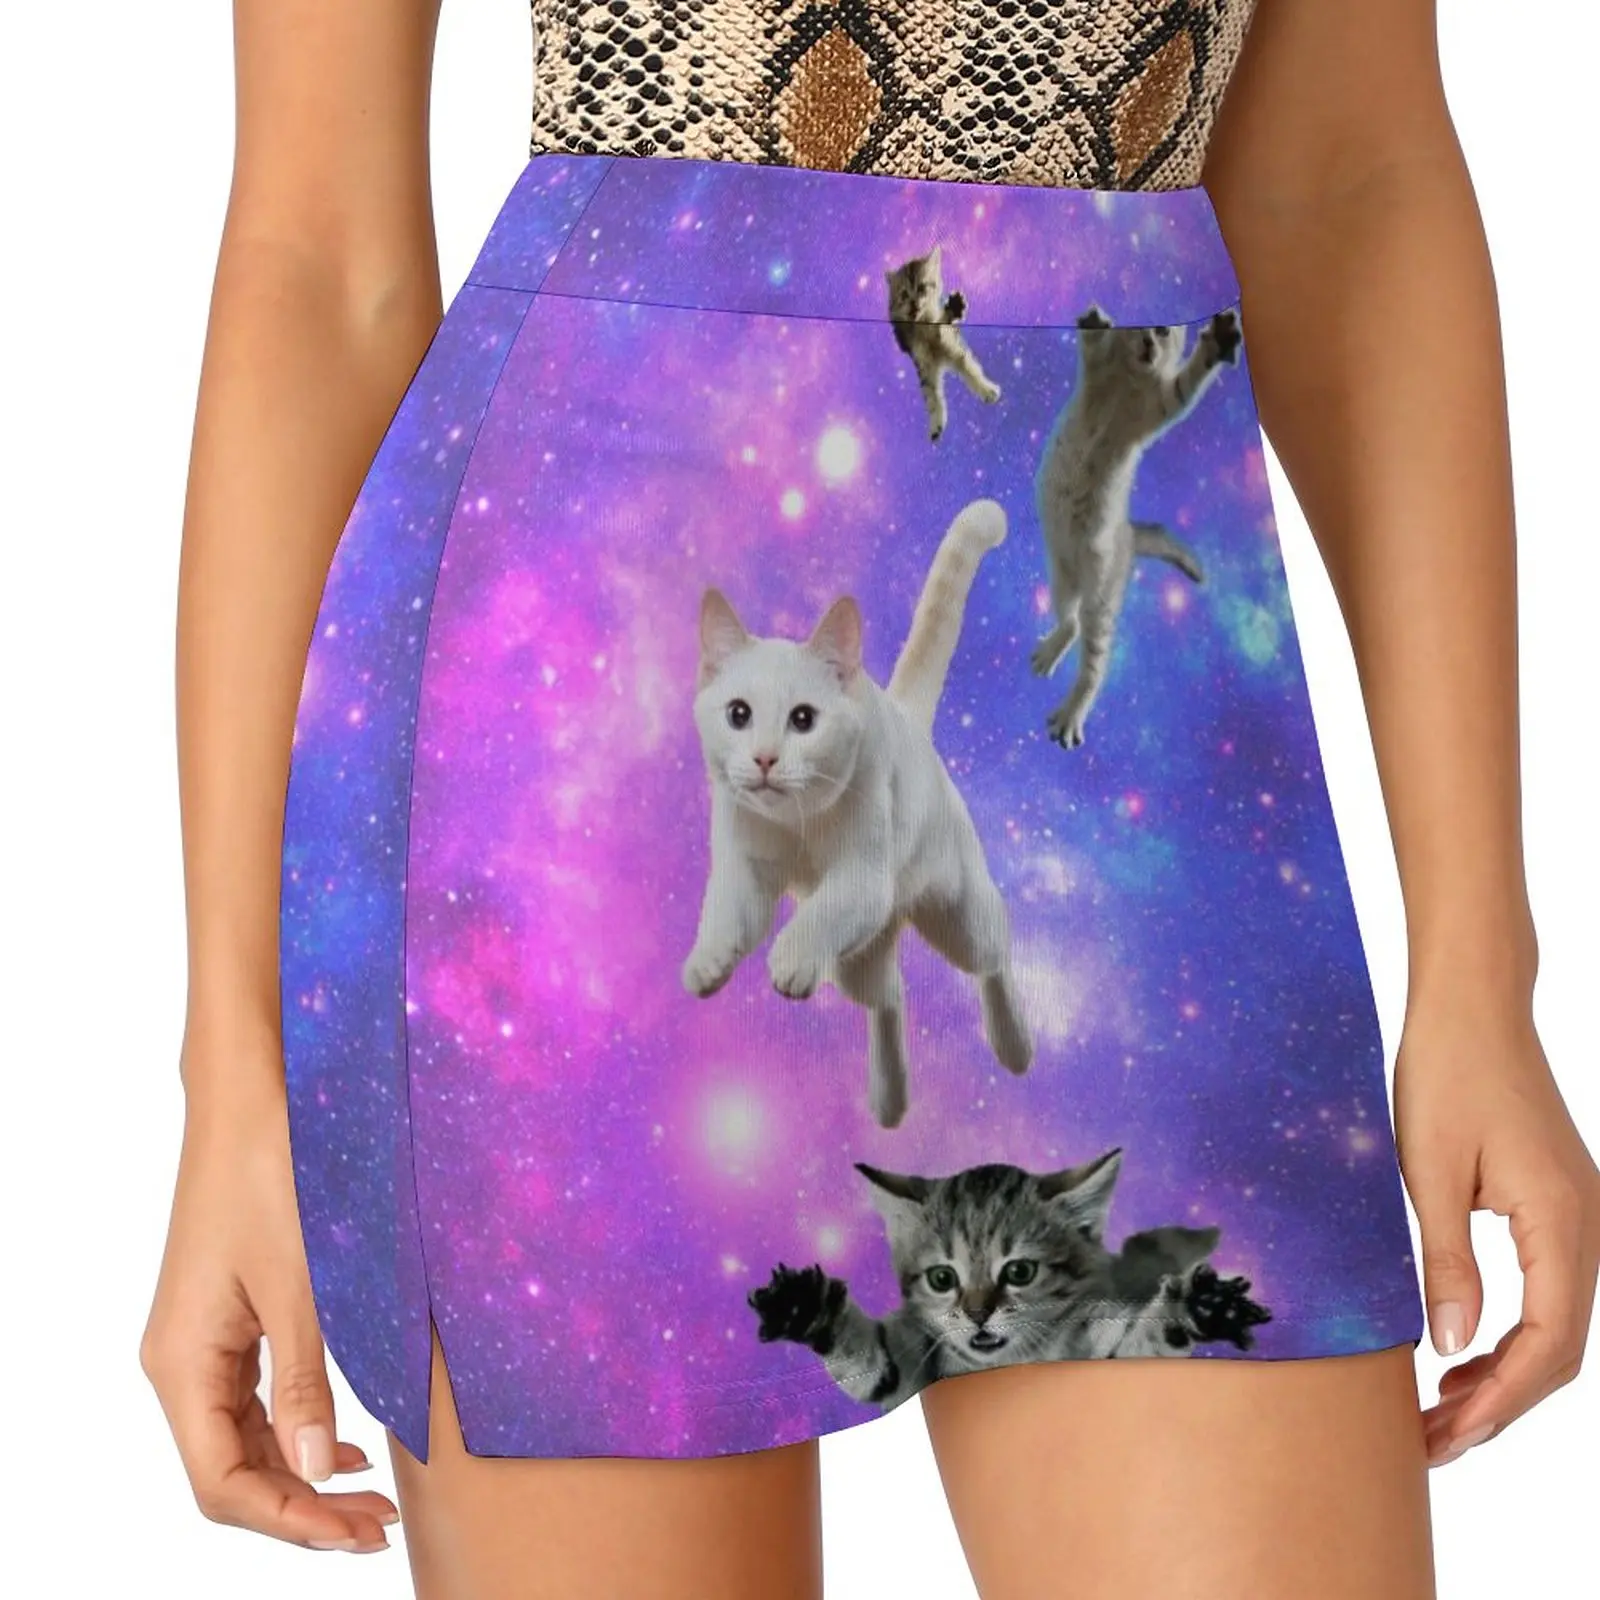 Cats in Space! Light Proof Trouser Skirt luxury evening dresses 2023 women's stylish skirts Korean skirts skirts for womens poultry handling gloves bite proof handling gloves long arm protection for cats dogs birds thickened resistant to for grooming